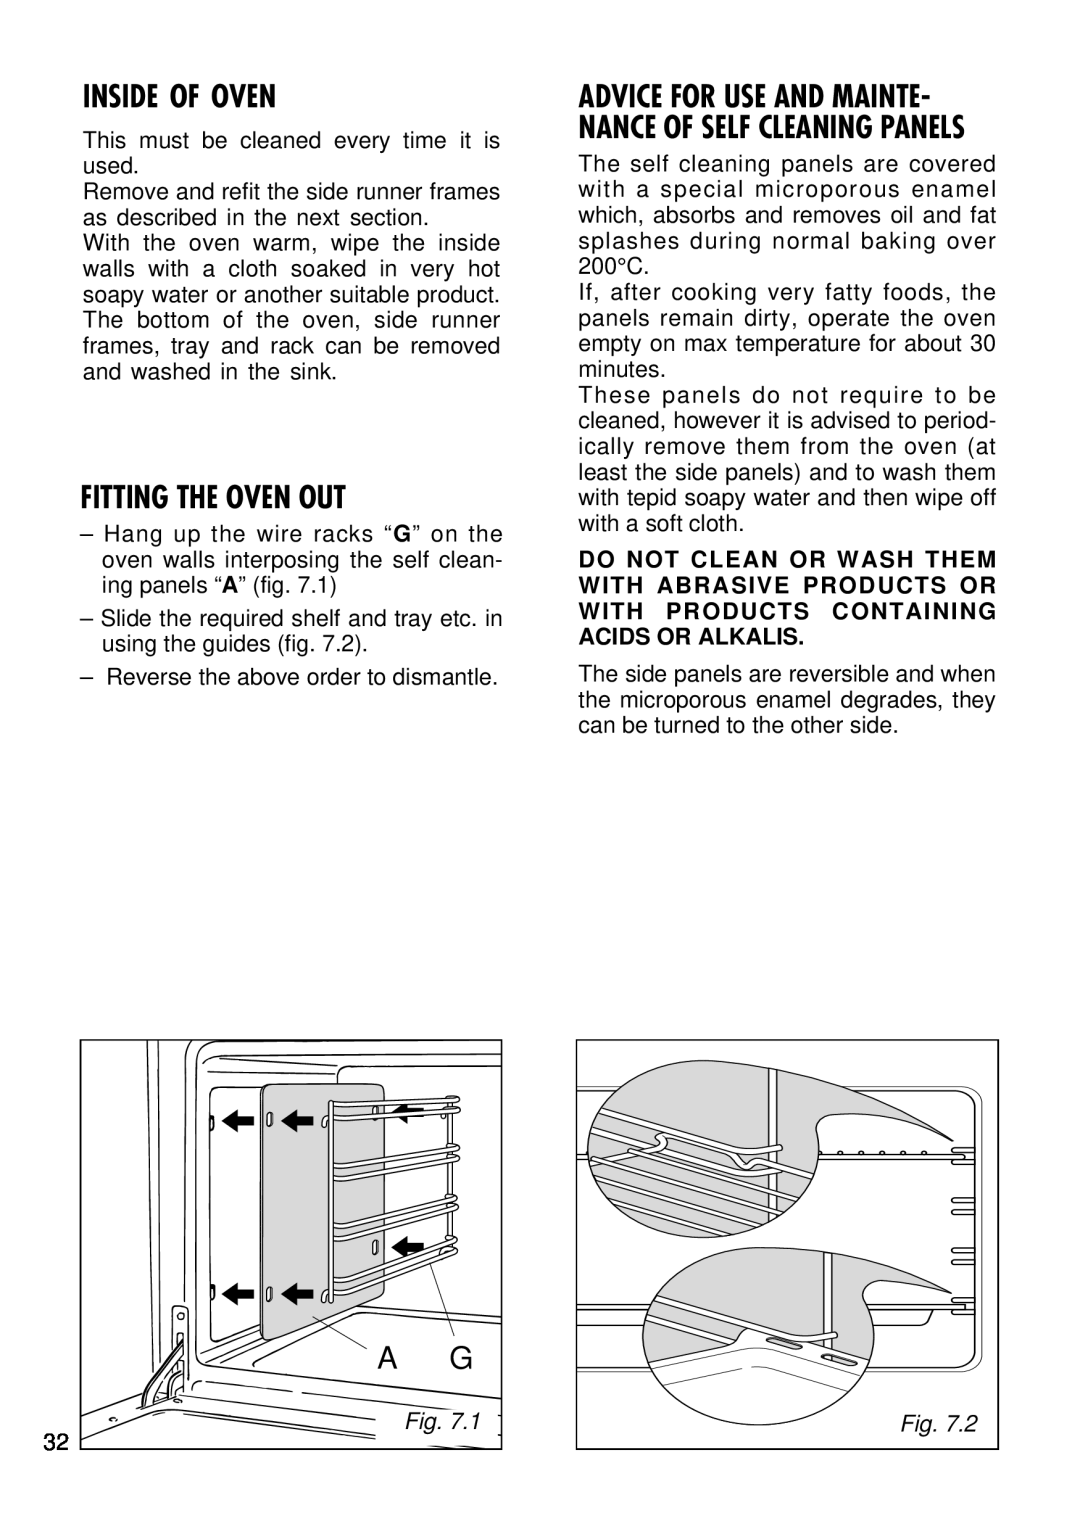 Kenwood CK 780 manual Inside Of Oven, Fitting The Oven Out, Advice For Use And Mainte- Nance Of Self Cleaning Panels 